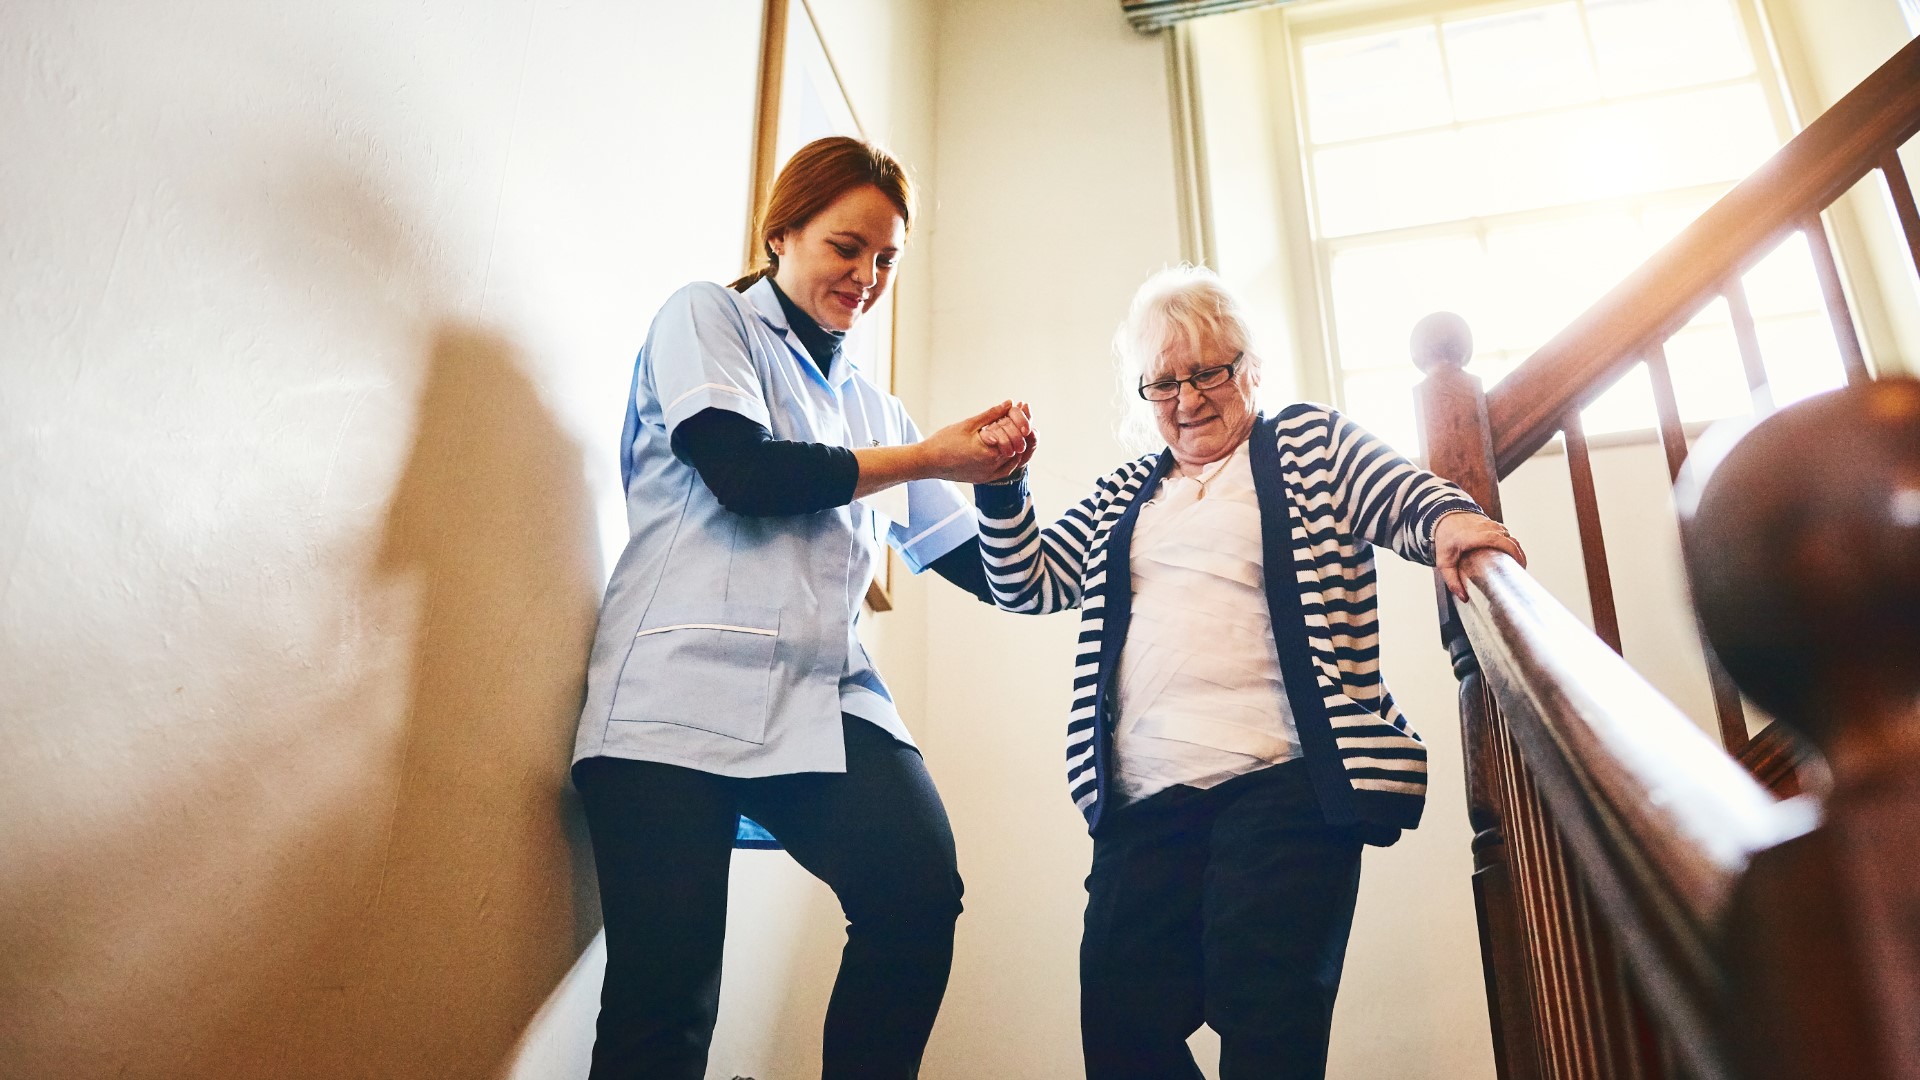 Getting older is no walk in the park! Maintaining your mobility is key to enjoying those later years. Chiropractor Dr. Michael Kwast joined us with advice for avoiding the nursing home.